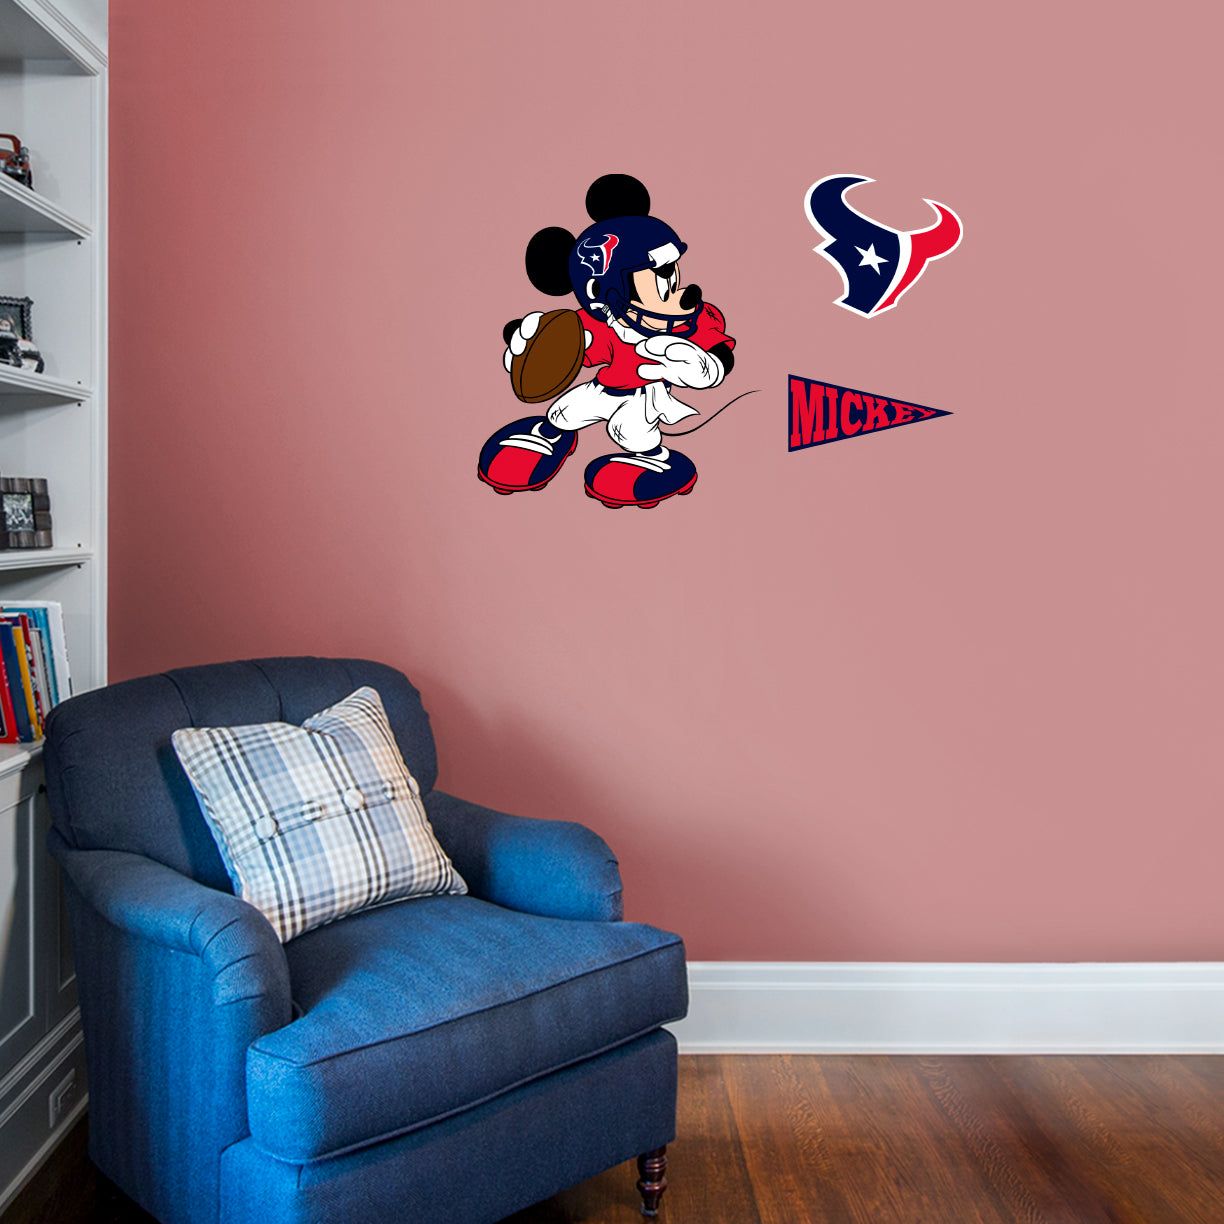 Houston Texans: Mickey Mouse - Officially Licensed NFL Removable Adhesive Decal